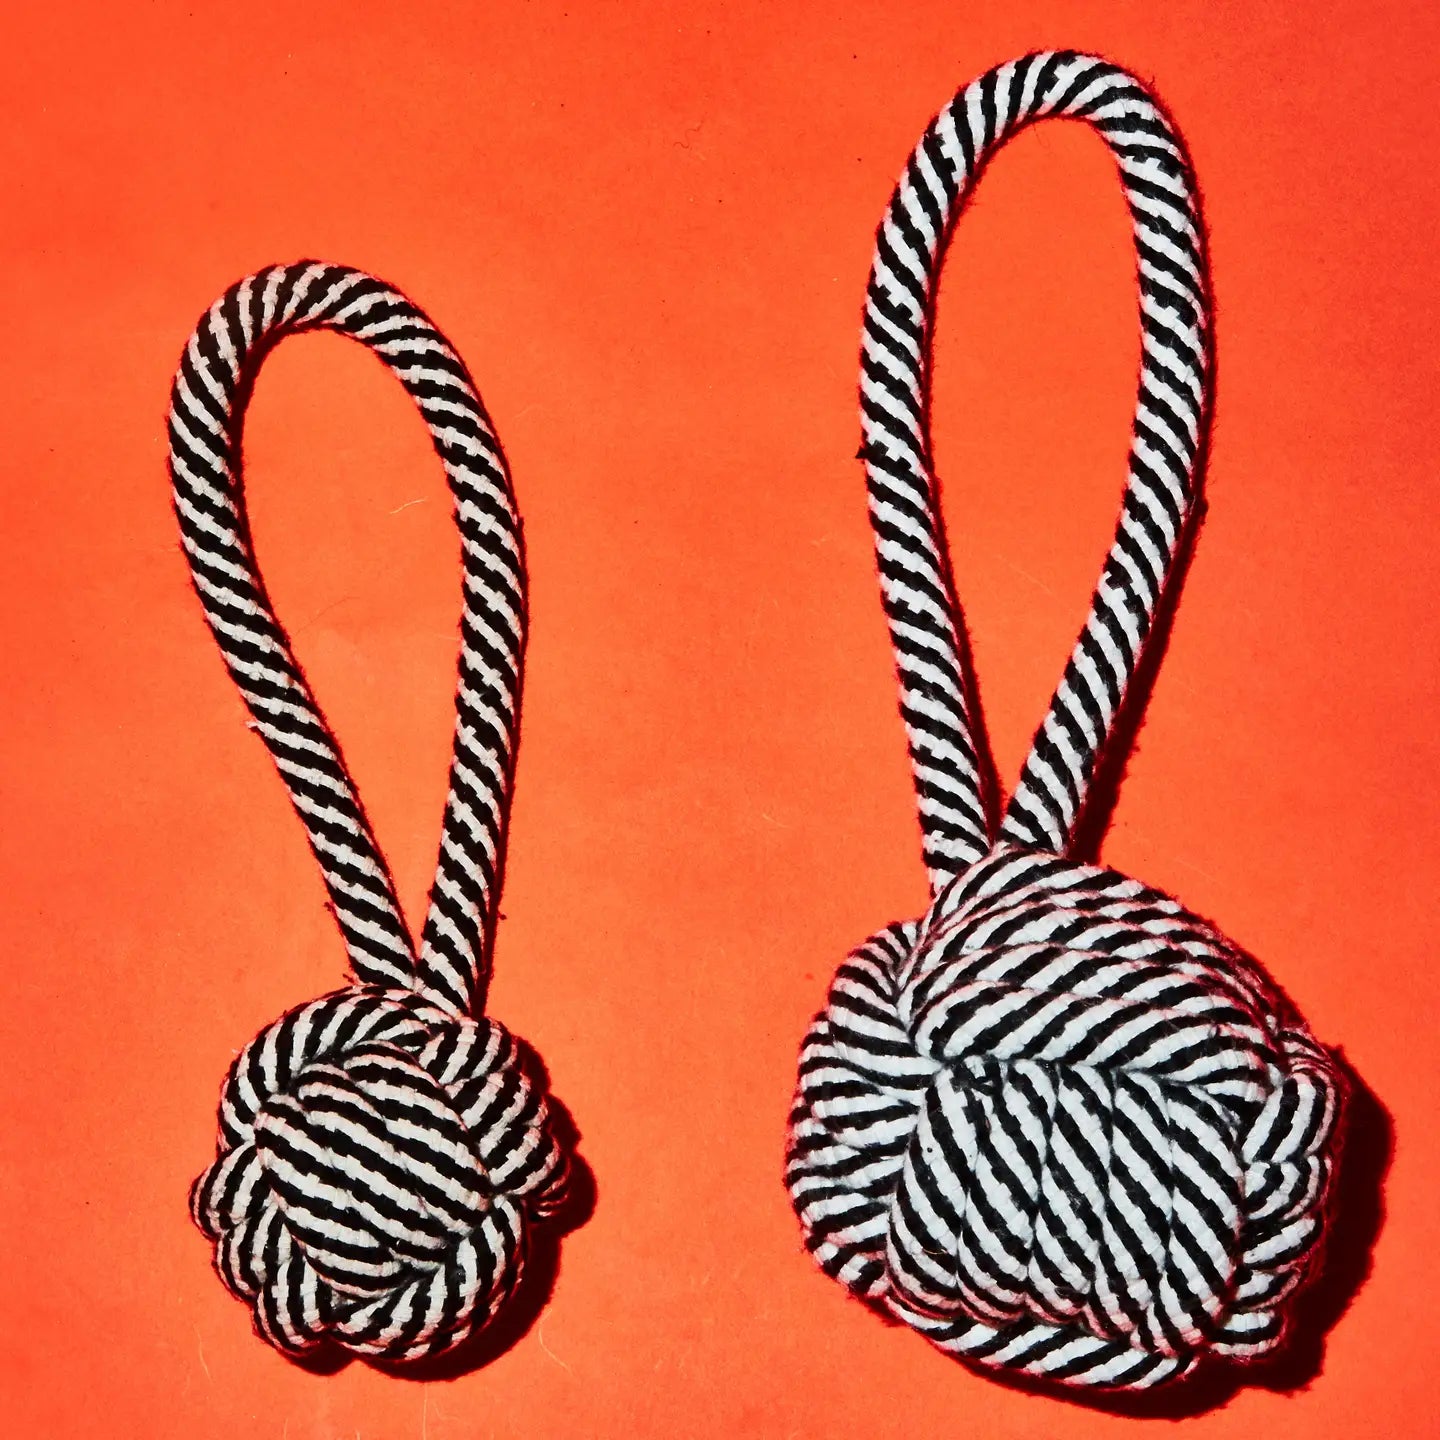 Black and White Rope Knot Toy